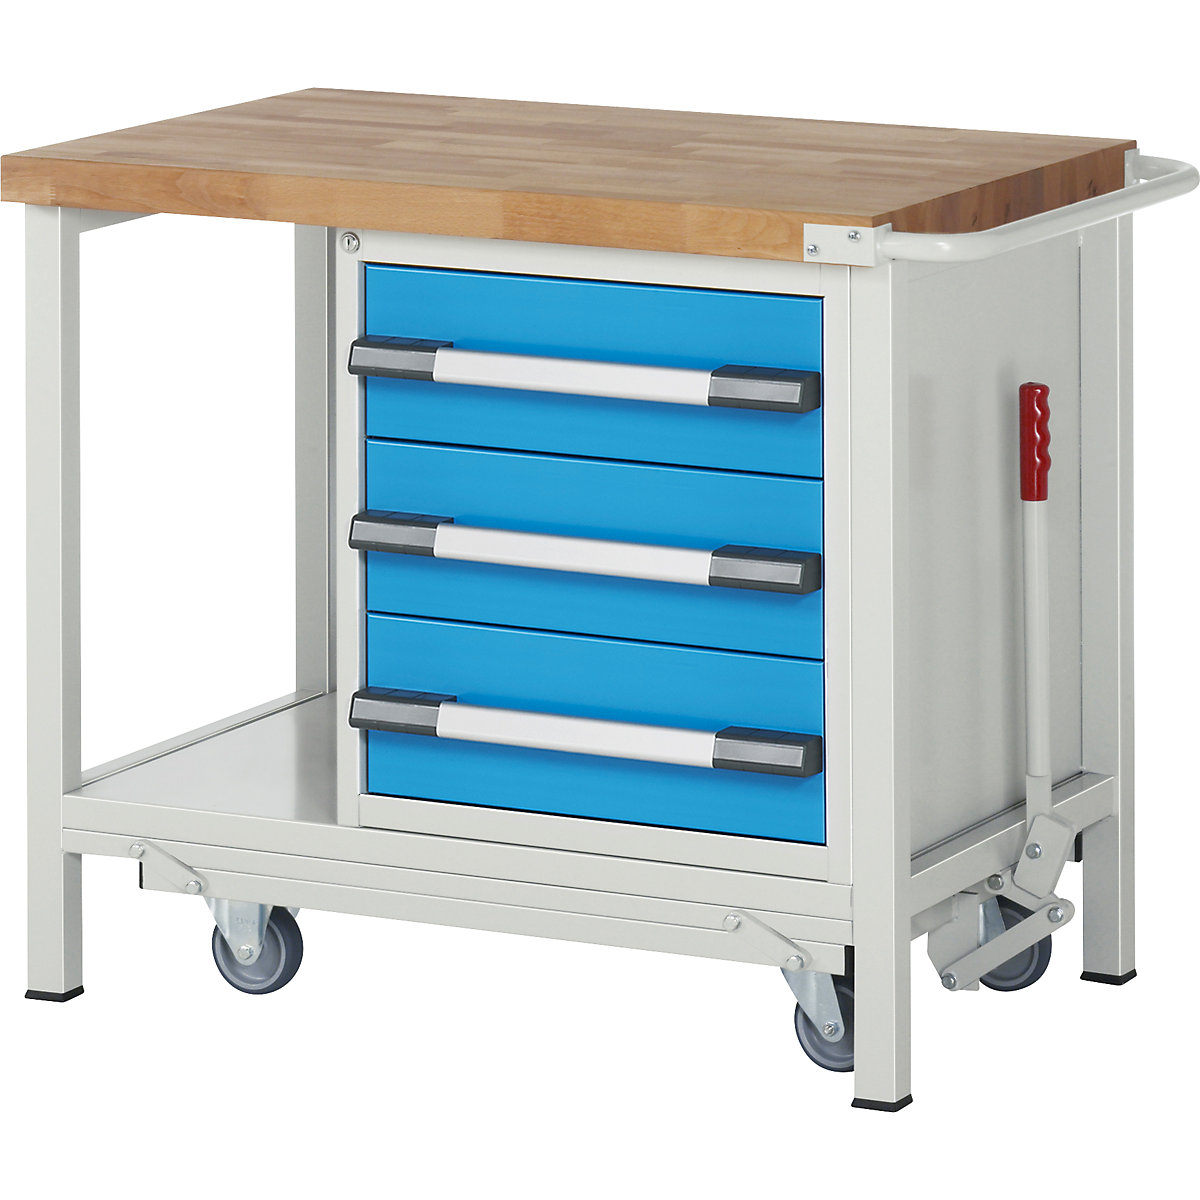 Mobile and lowerable workbench, Series 8 frame construction – eurokraft pro